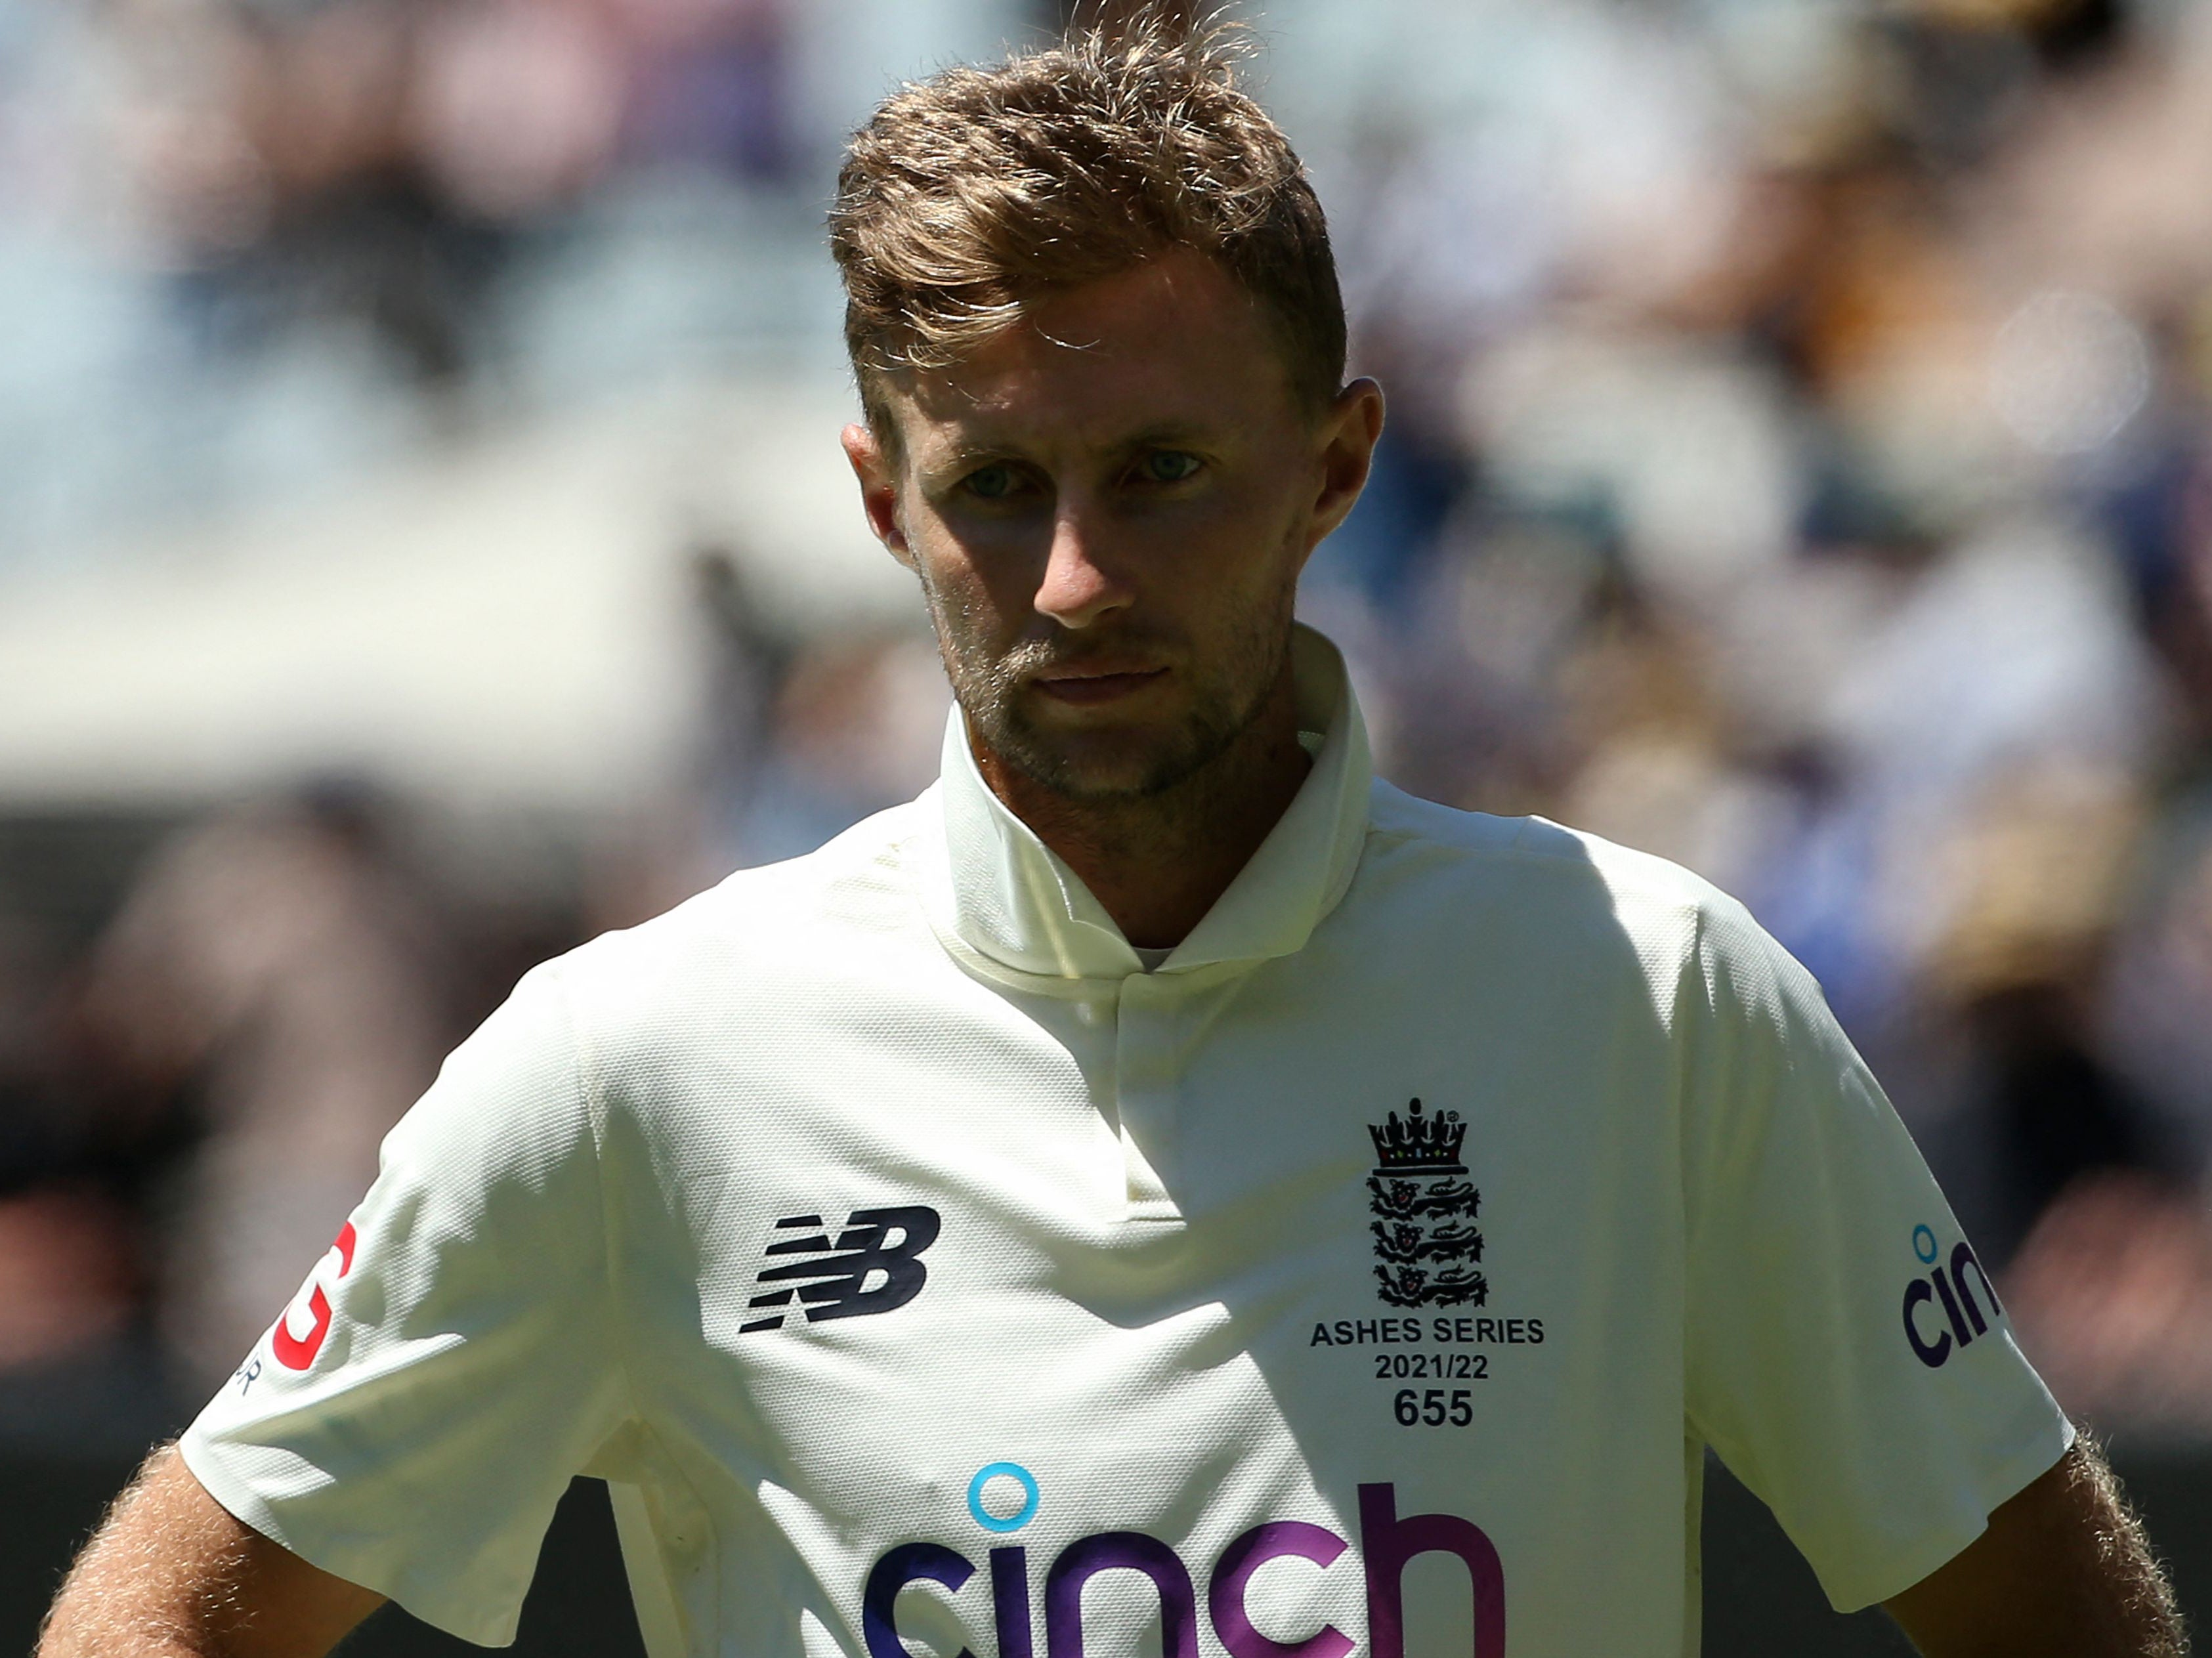 England’s men have slipped to an embarrassing Ashes defeat